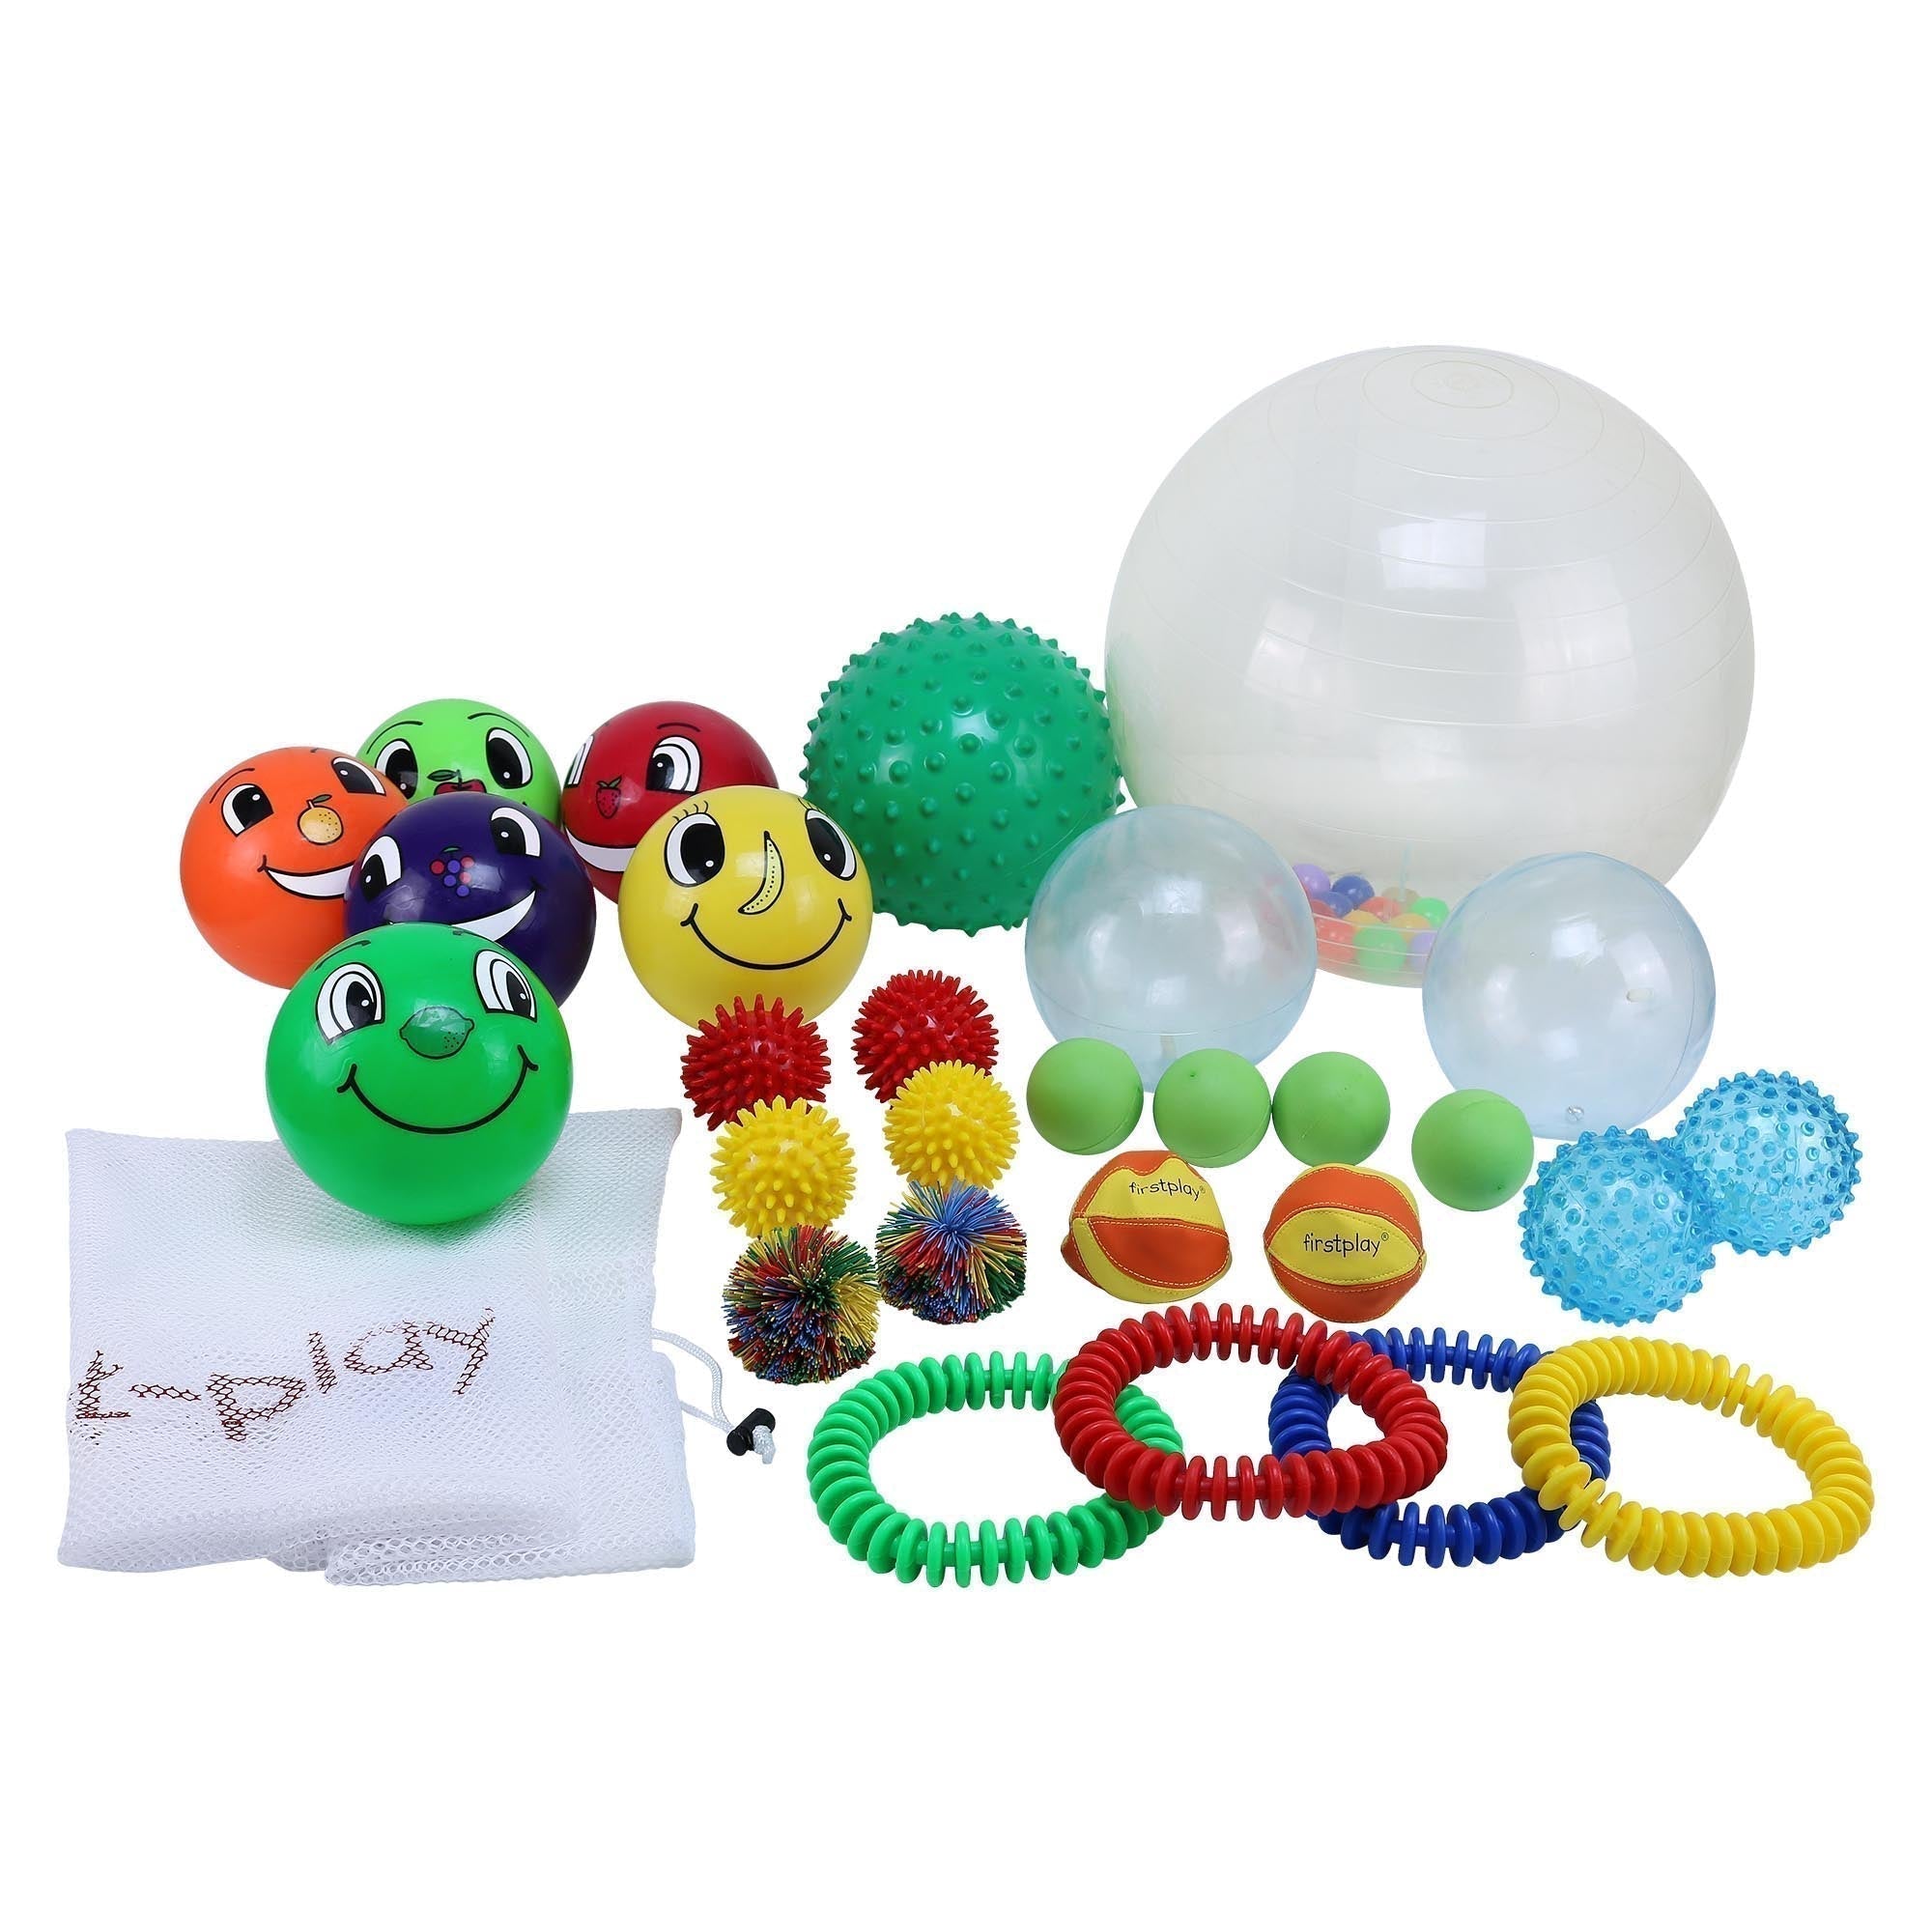 First-play Multi Sensory Motor Pack, The First-play Multi Sensory Motor Pack offers a comprehensive selection of tactile equipment specifically designed to stimulate the senses in a classroom setting. It's not just about play but also about enhancing sensory perception, fine motor skills, and cognitive development among children. First-play Multi Sensory Motor Pack Features: Sensory Stimulation: The pack is tailored to stimulate senses through a variety of touch and feel exercises. Tactile Variety: Differen